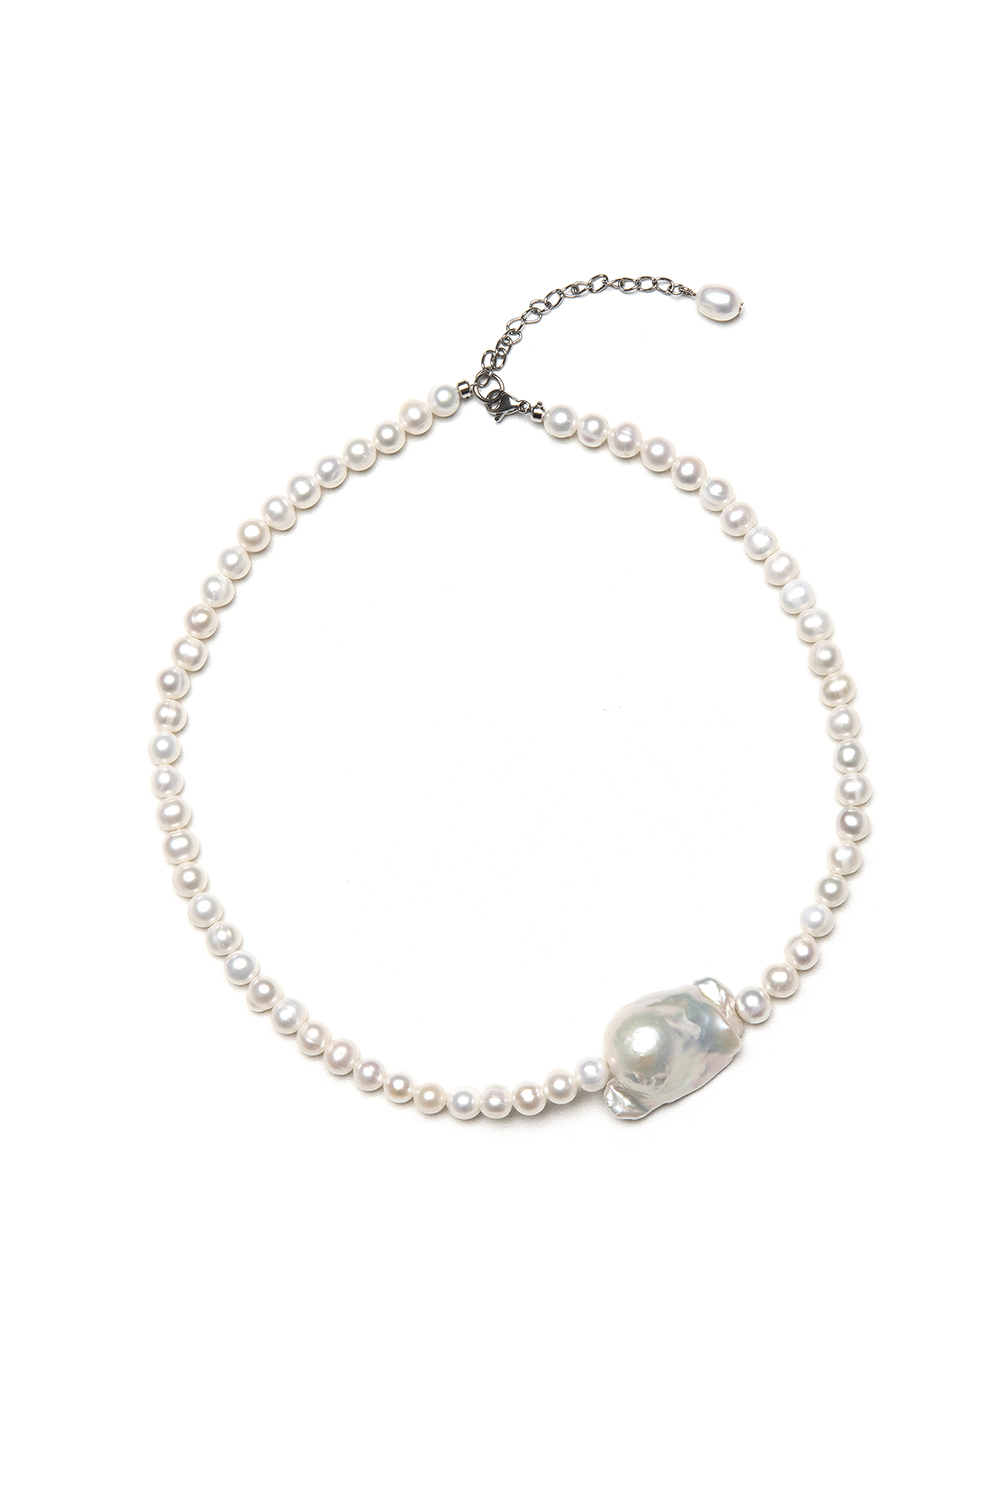 Heart freshwater pearl necklace (order-made)